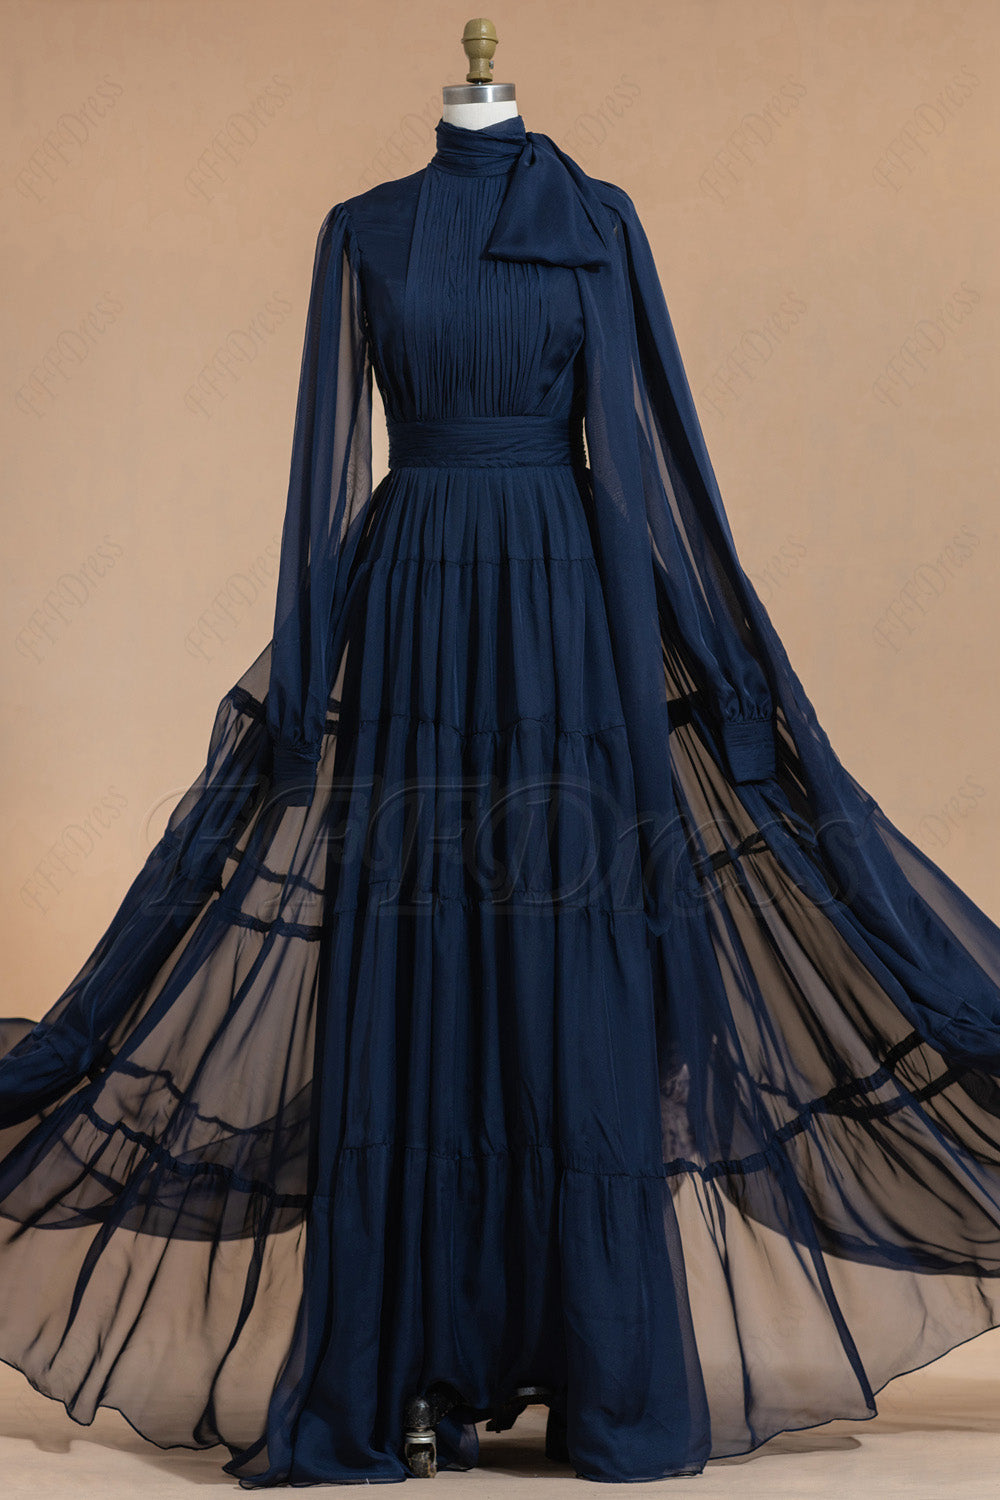 High neck modest navy blue bridesmaid dresses long sleeves with tiered skirt